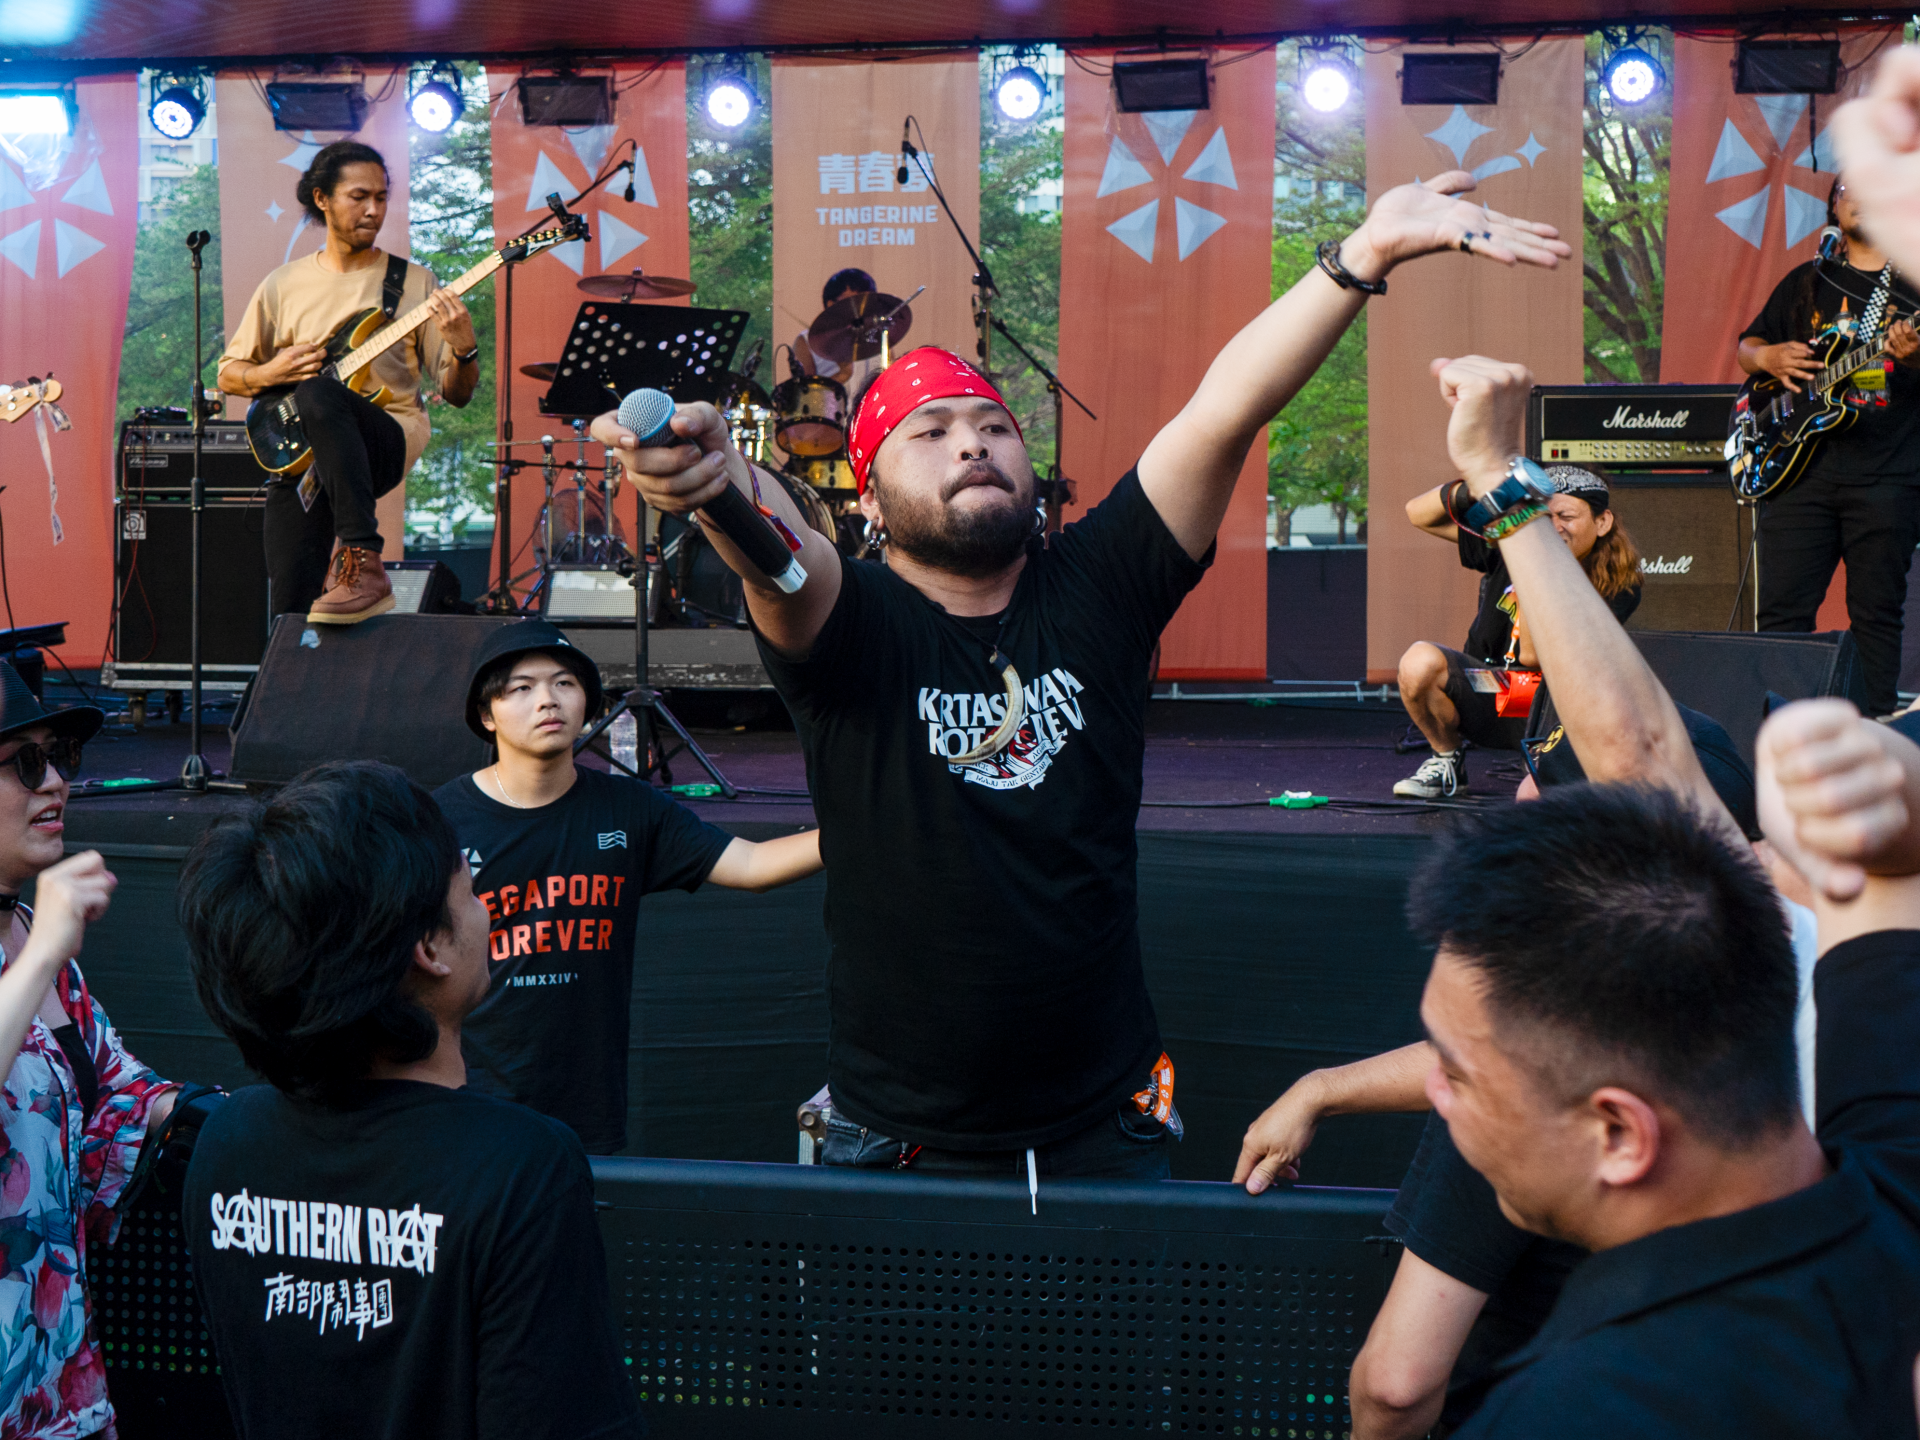 Indonesian band takes stand for Taiwan’s migrant workers | Labour Rights News